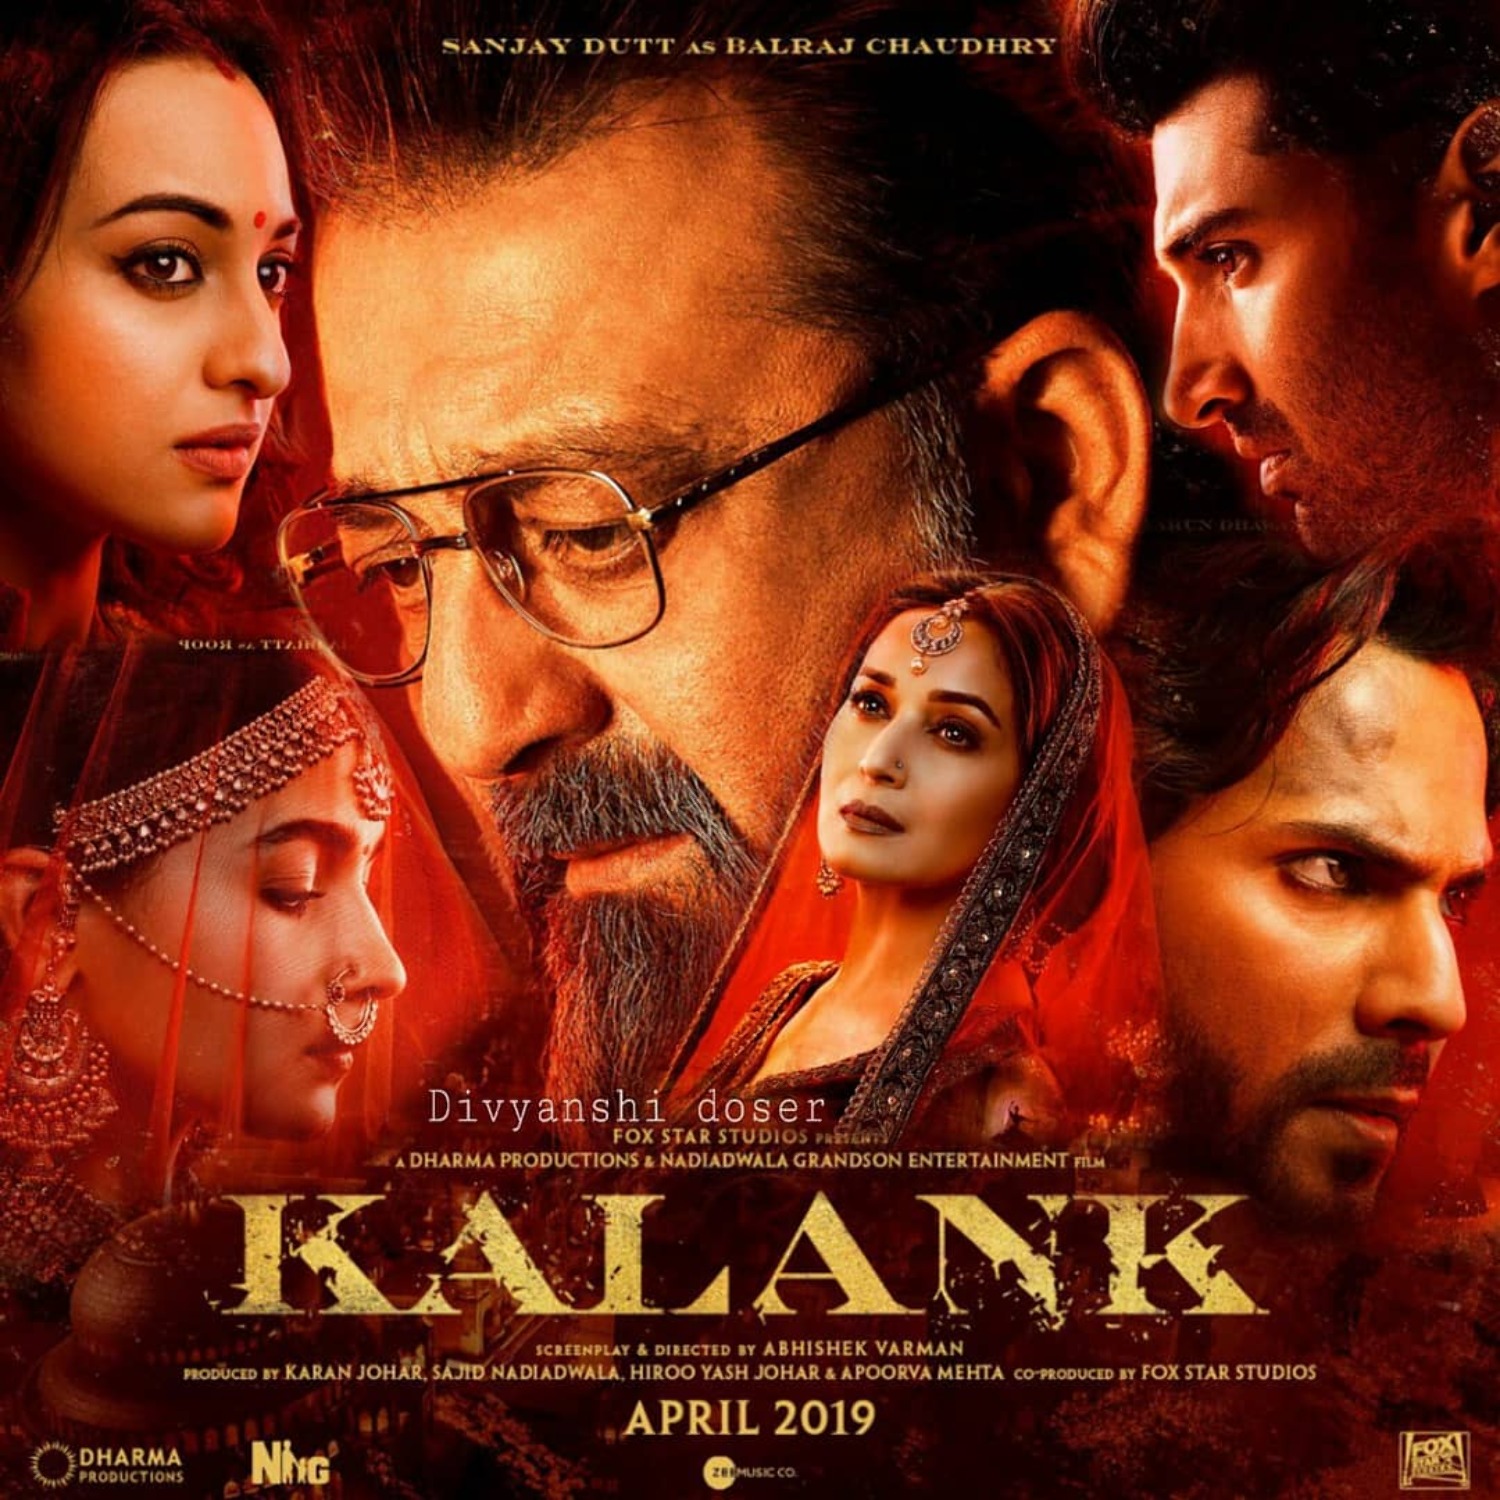 Kalank Movie Poster First Look Alia Bhatt Photos On Rediff Pages Alia bhatt is an actress who works in hindi films. rediff pages rediffmail